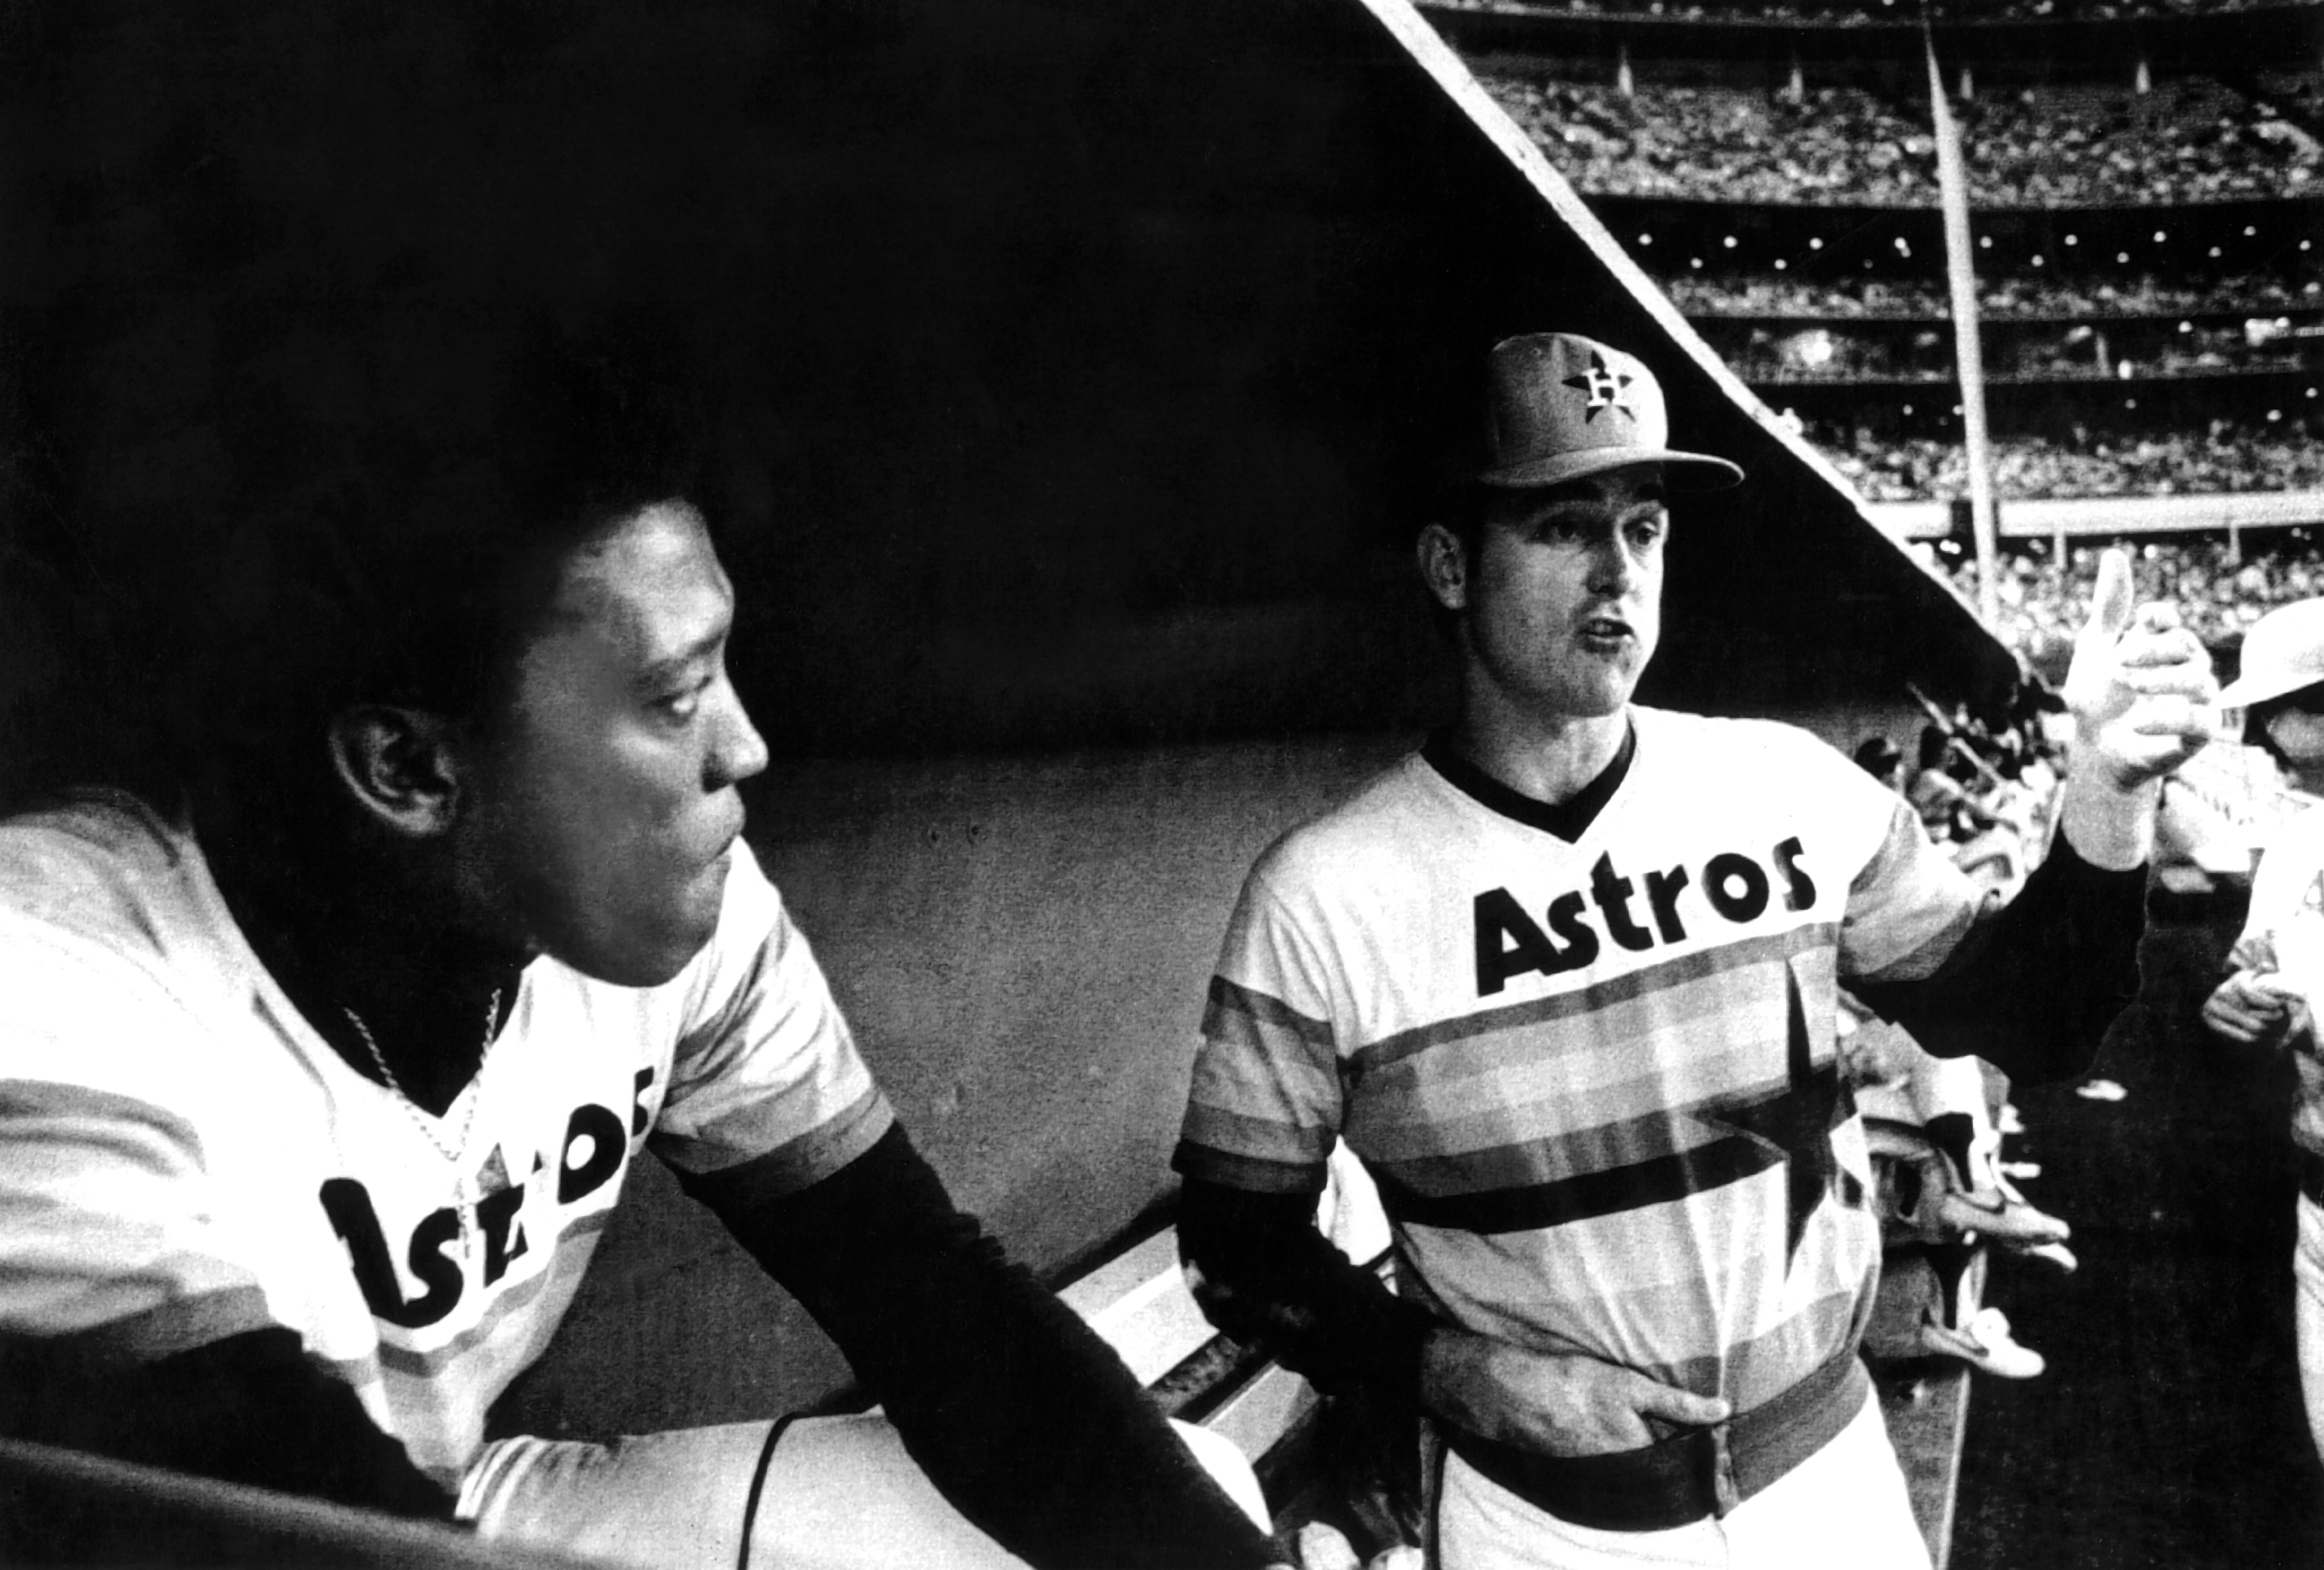 J.R. Richard, power pitcher for Astros in '70s, dies at 71